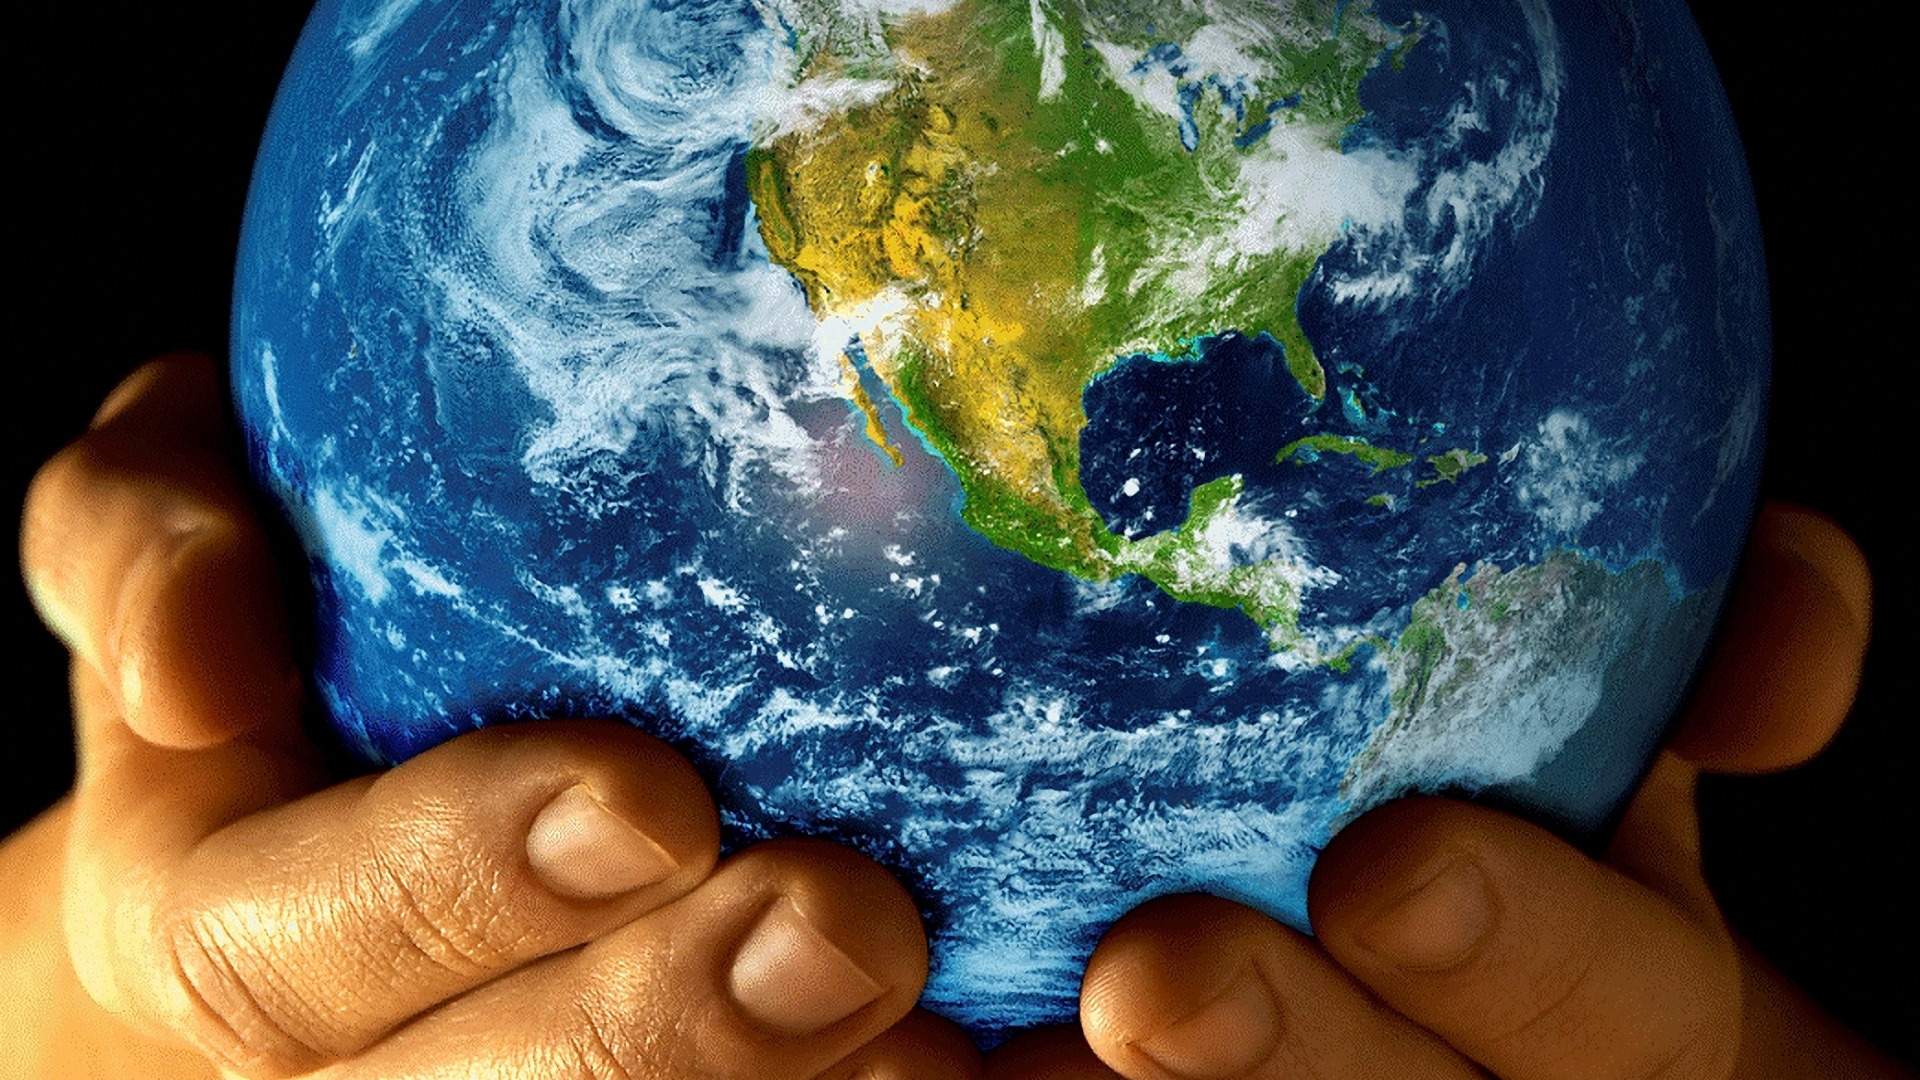 The World In Your Hands for 1920 x 1080 HDTV 1080p resolution